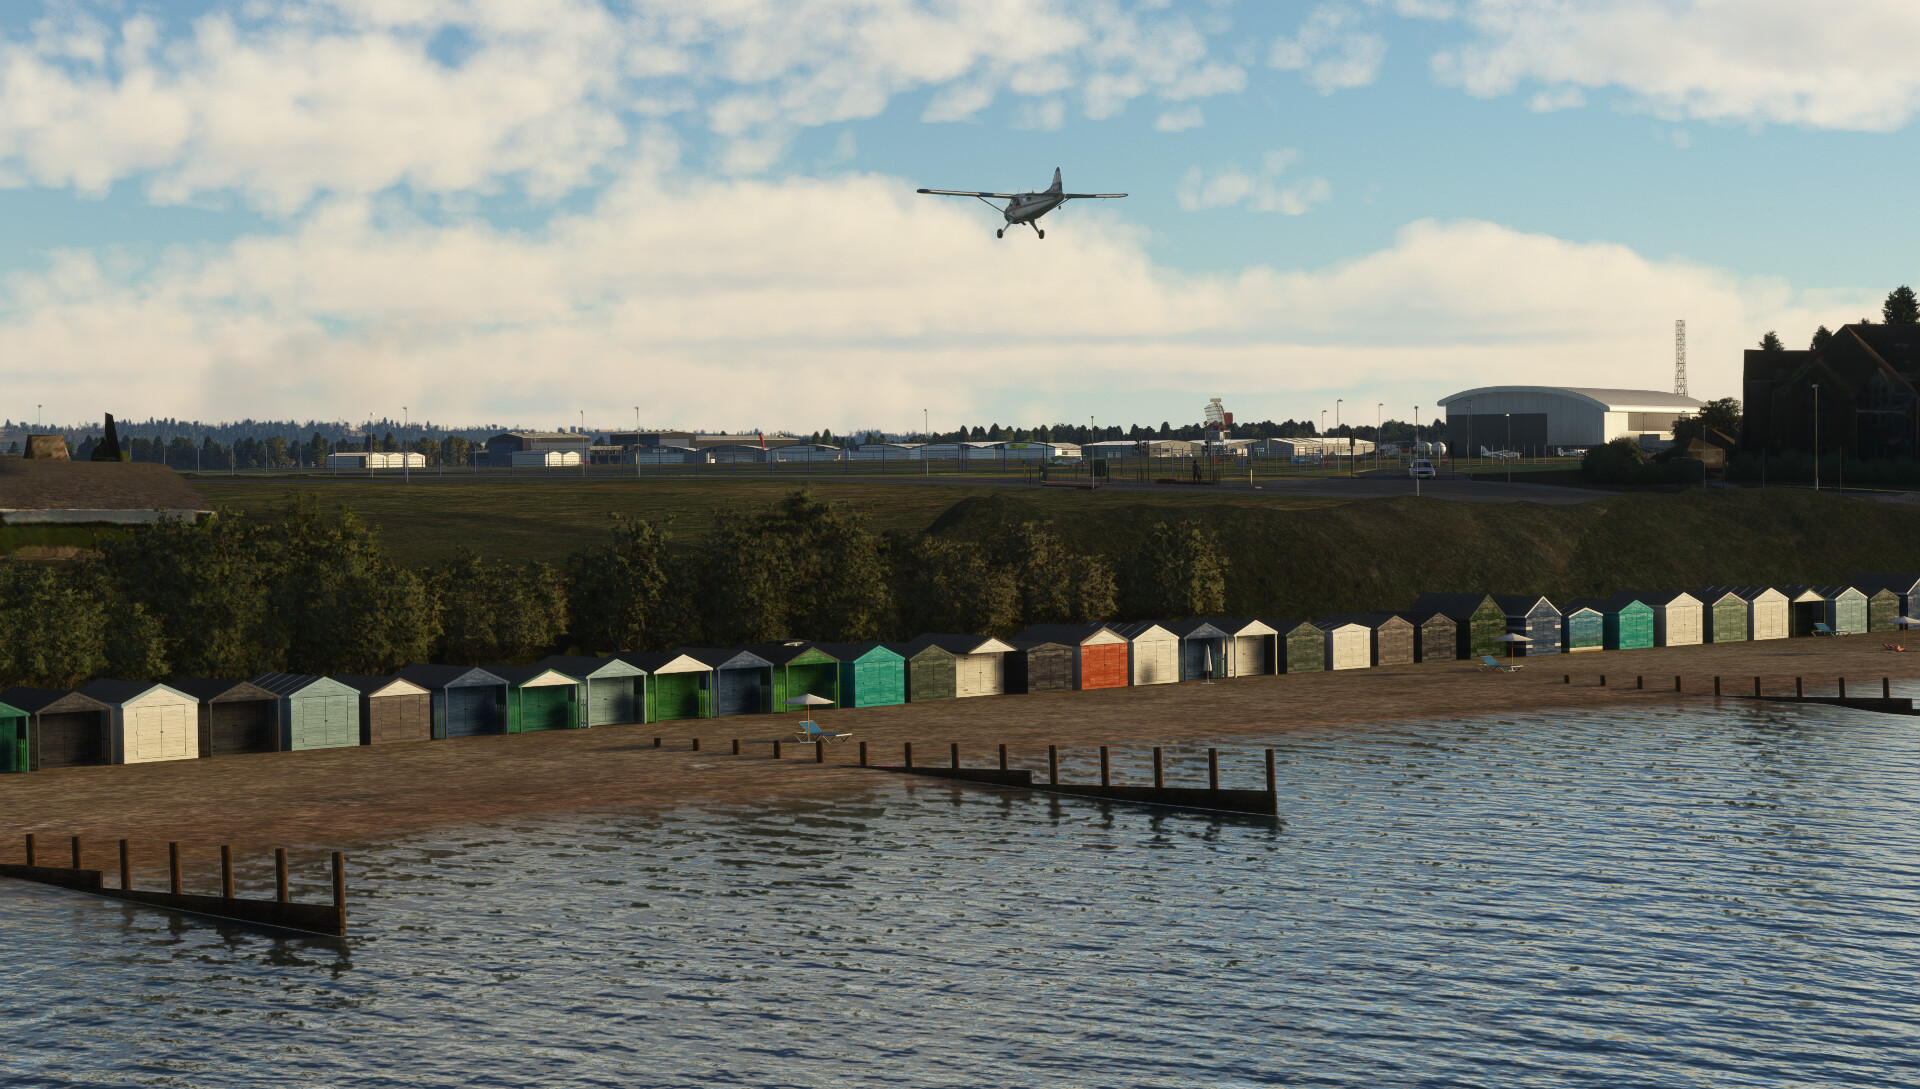 EGHF Solent Airport Released